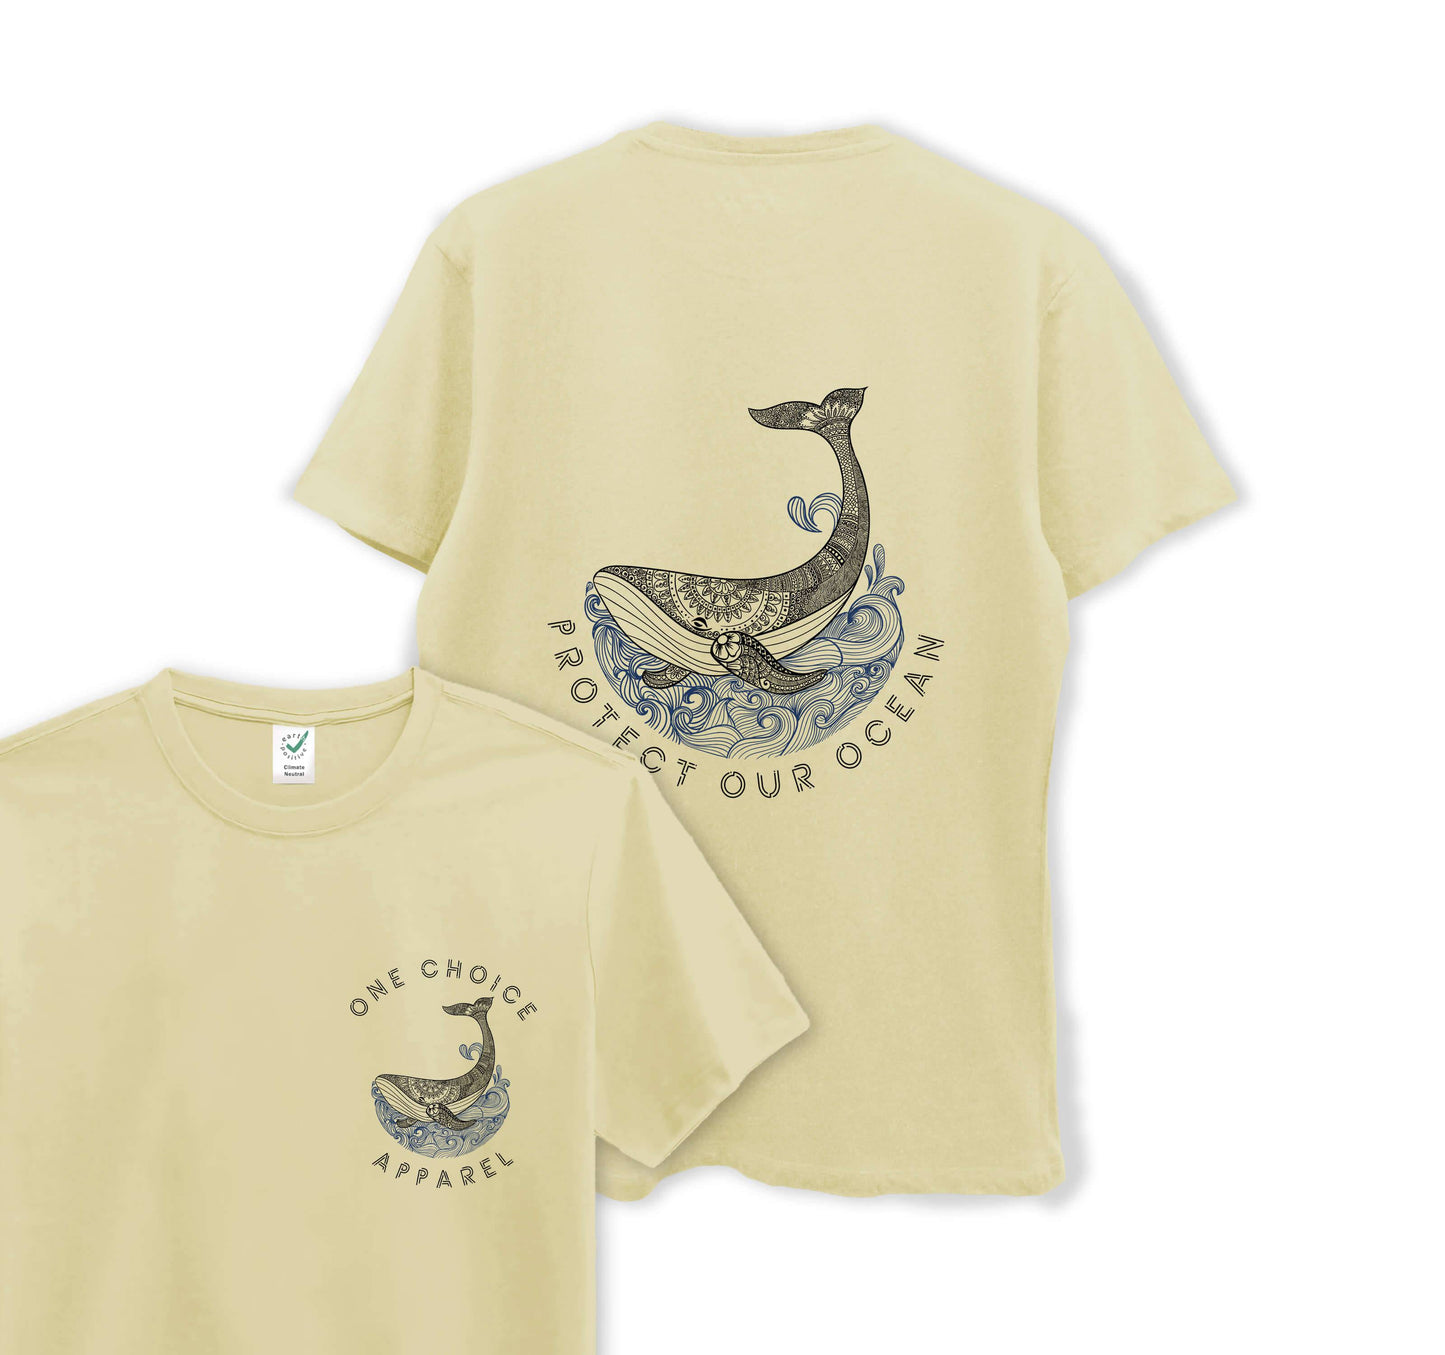 Protect Our Ocean - Organic Cotton Tee - One Choice Apparel